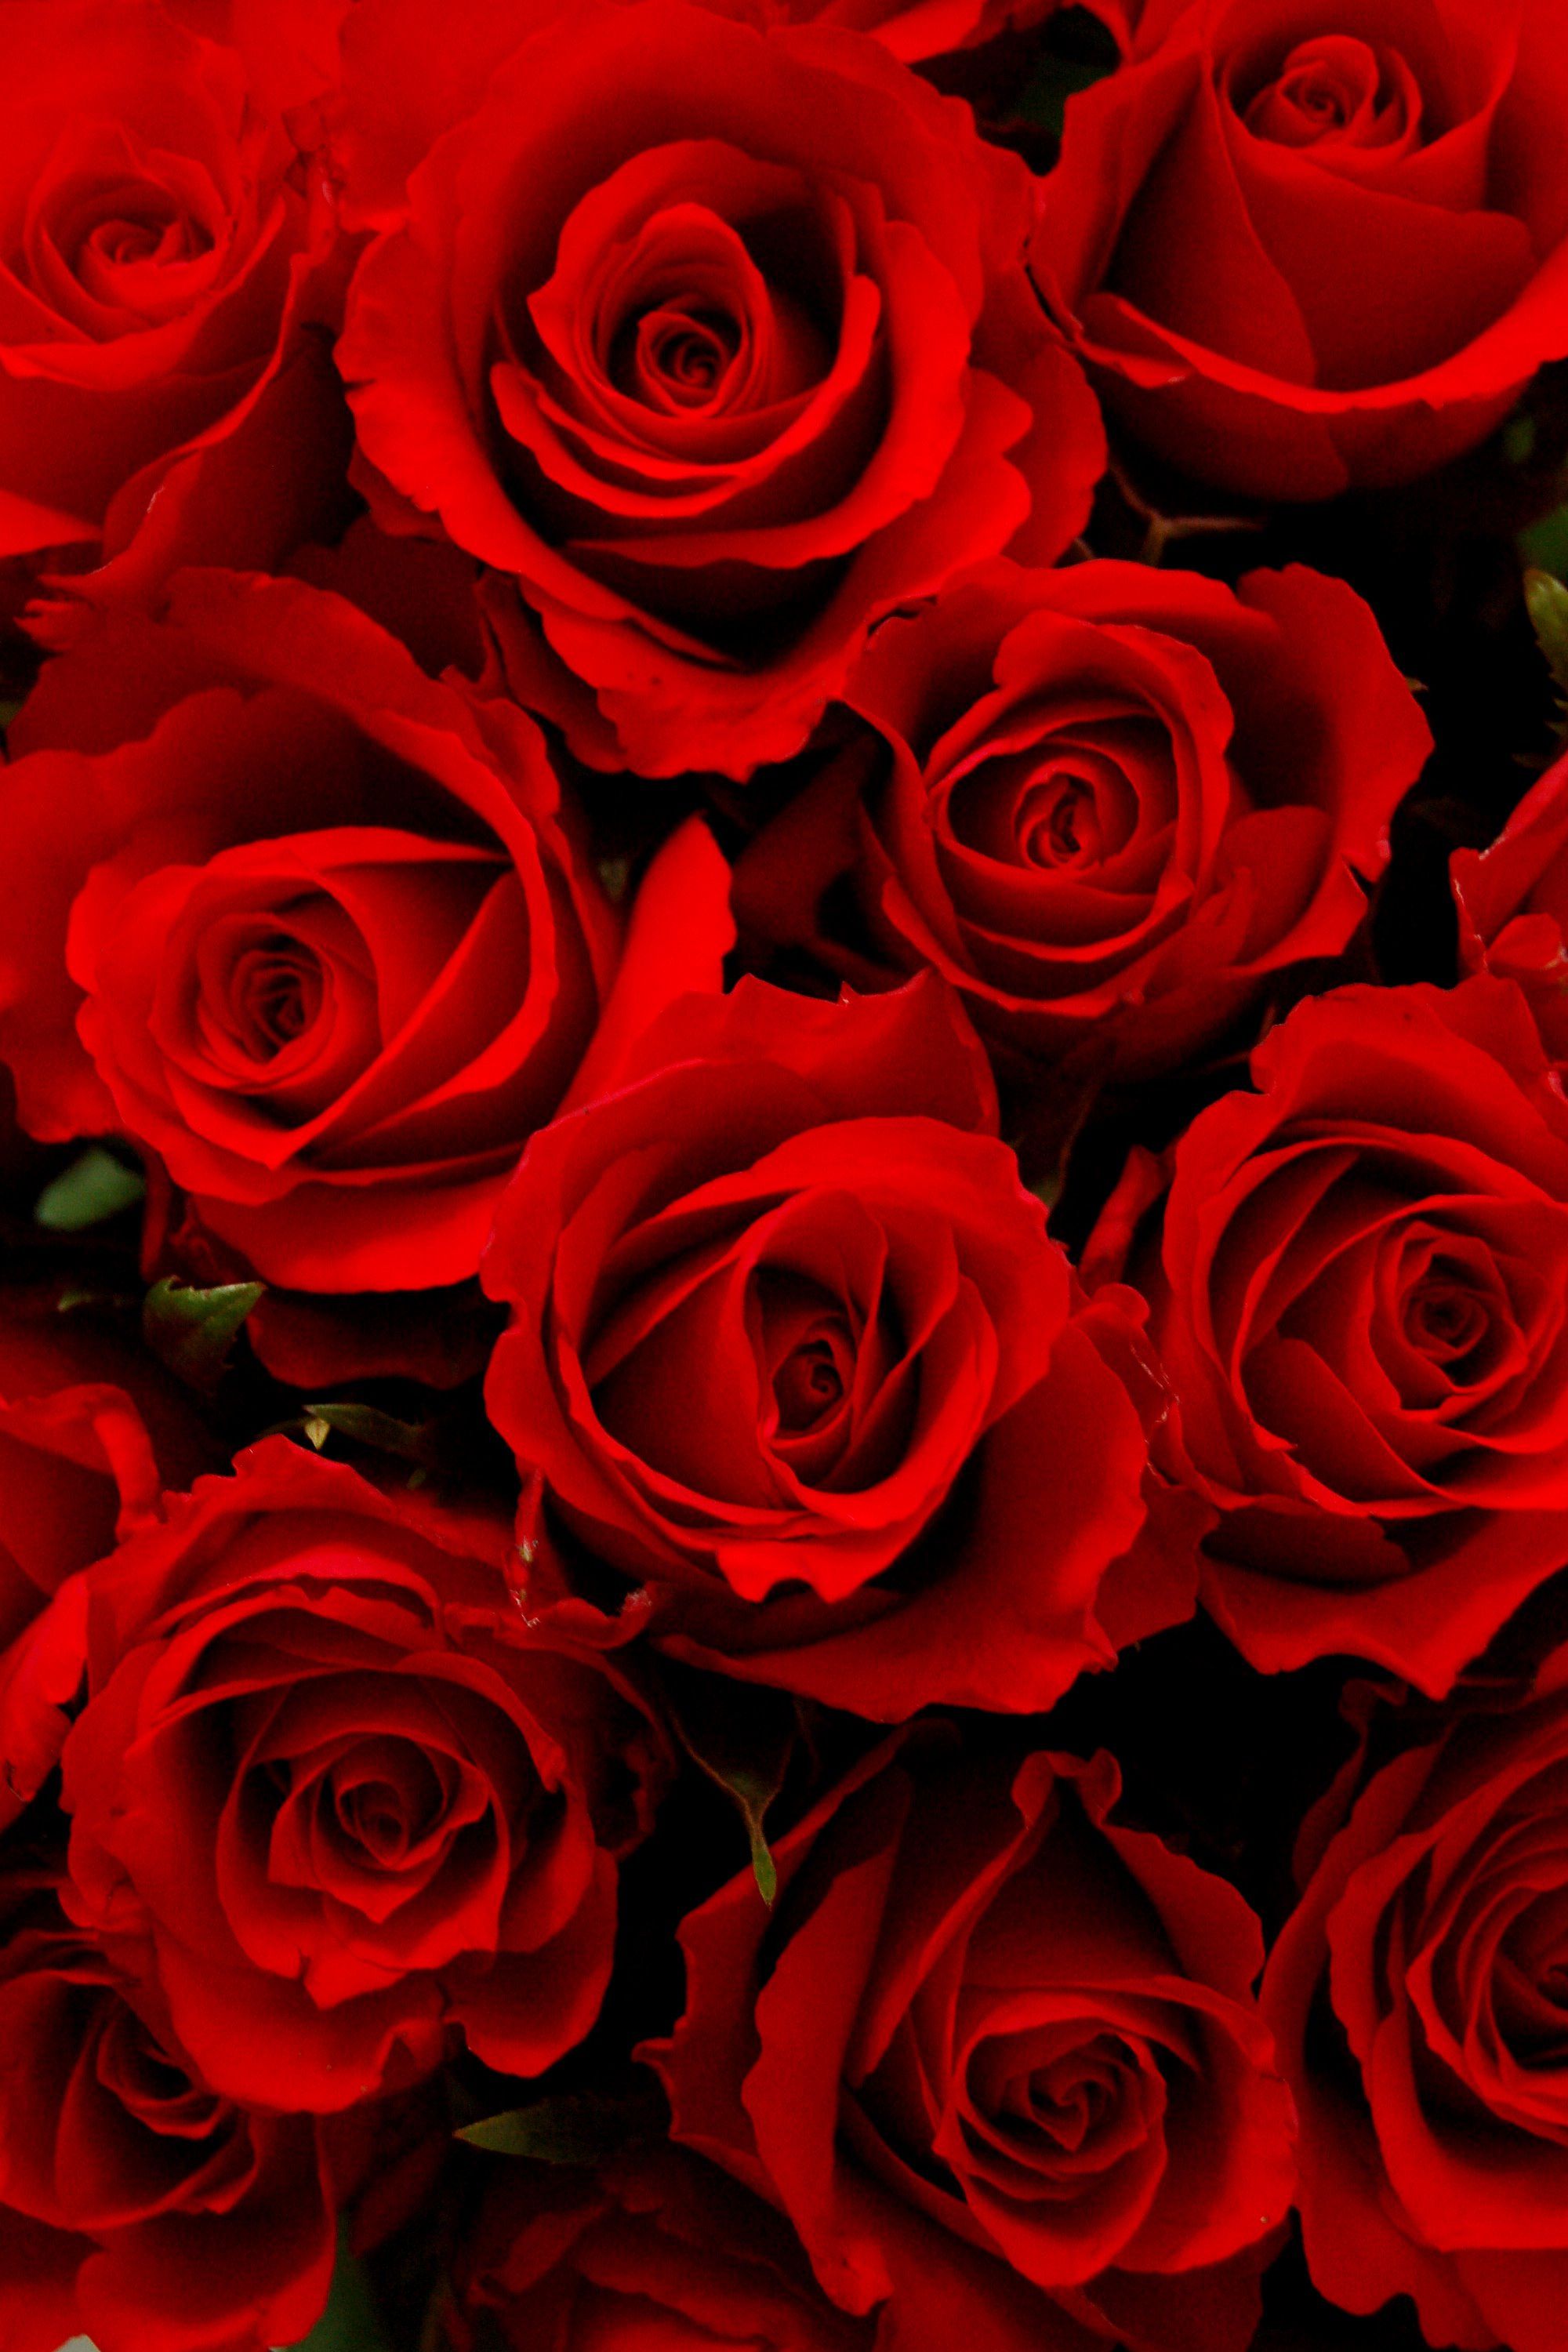 14 Rose Color Meanings - What Do the Colors of Roses Mean for ...